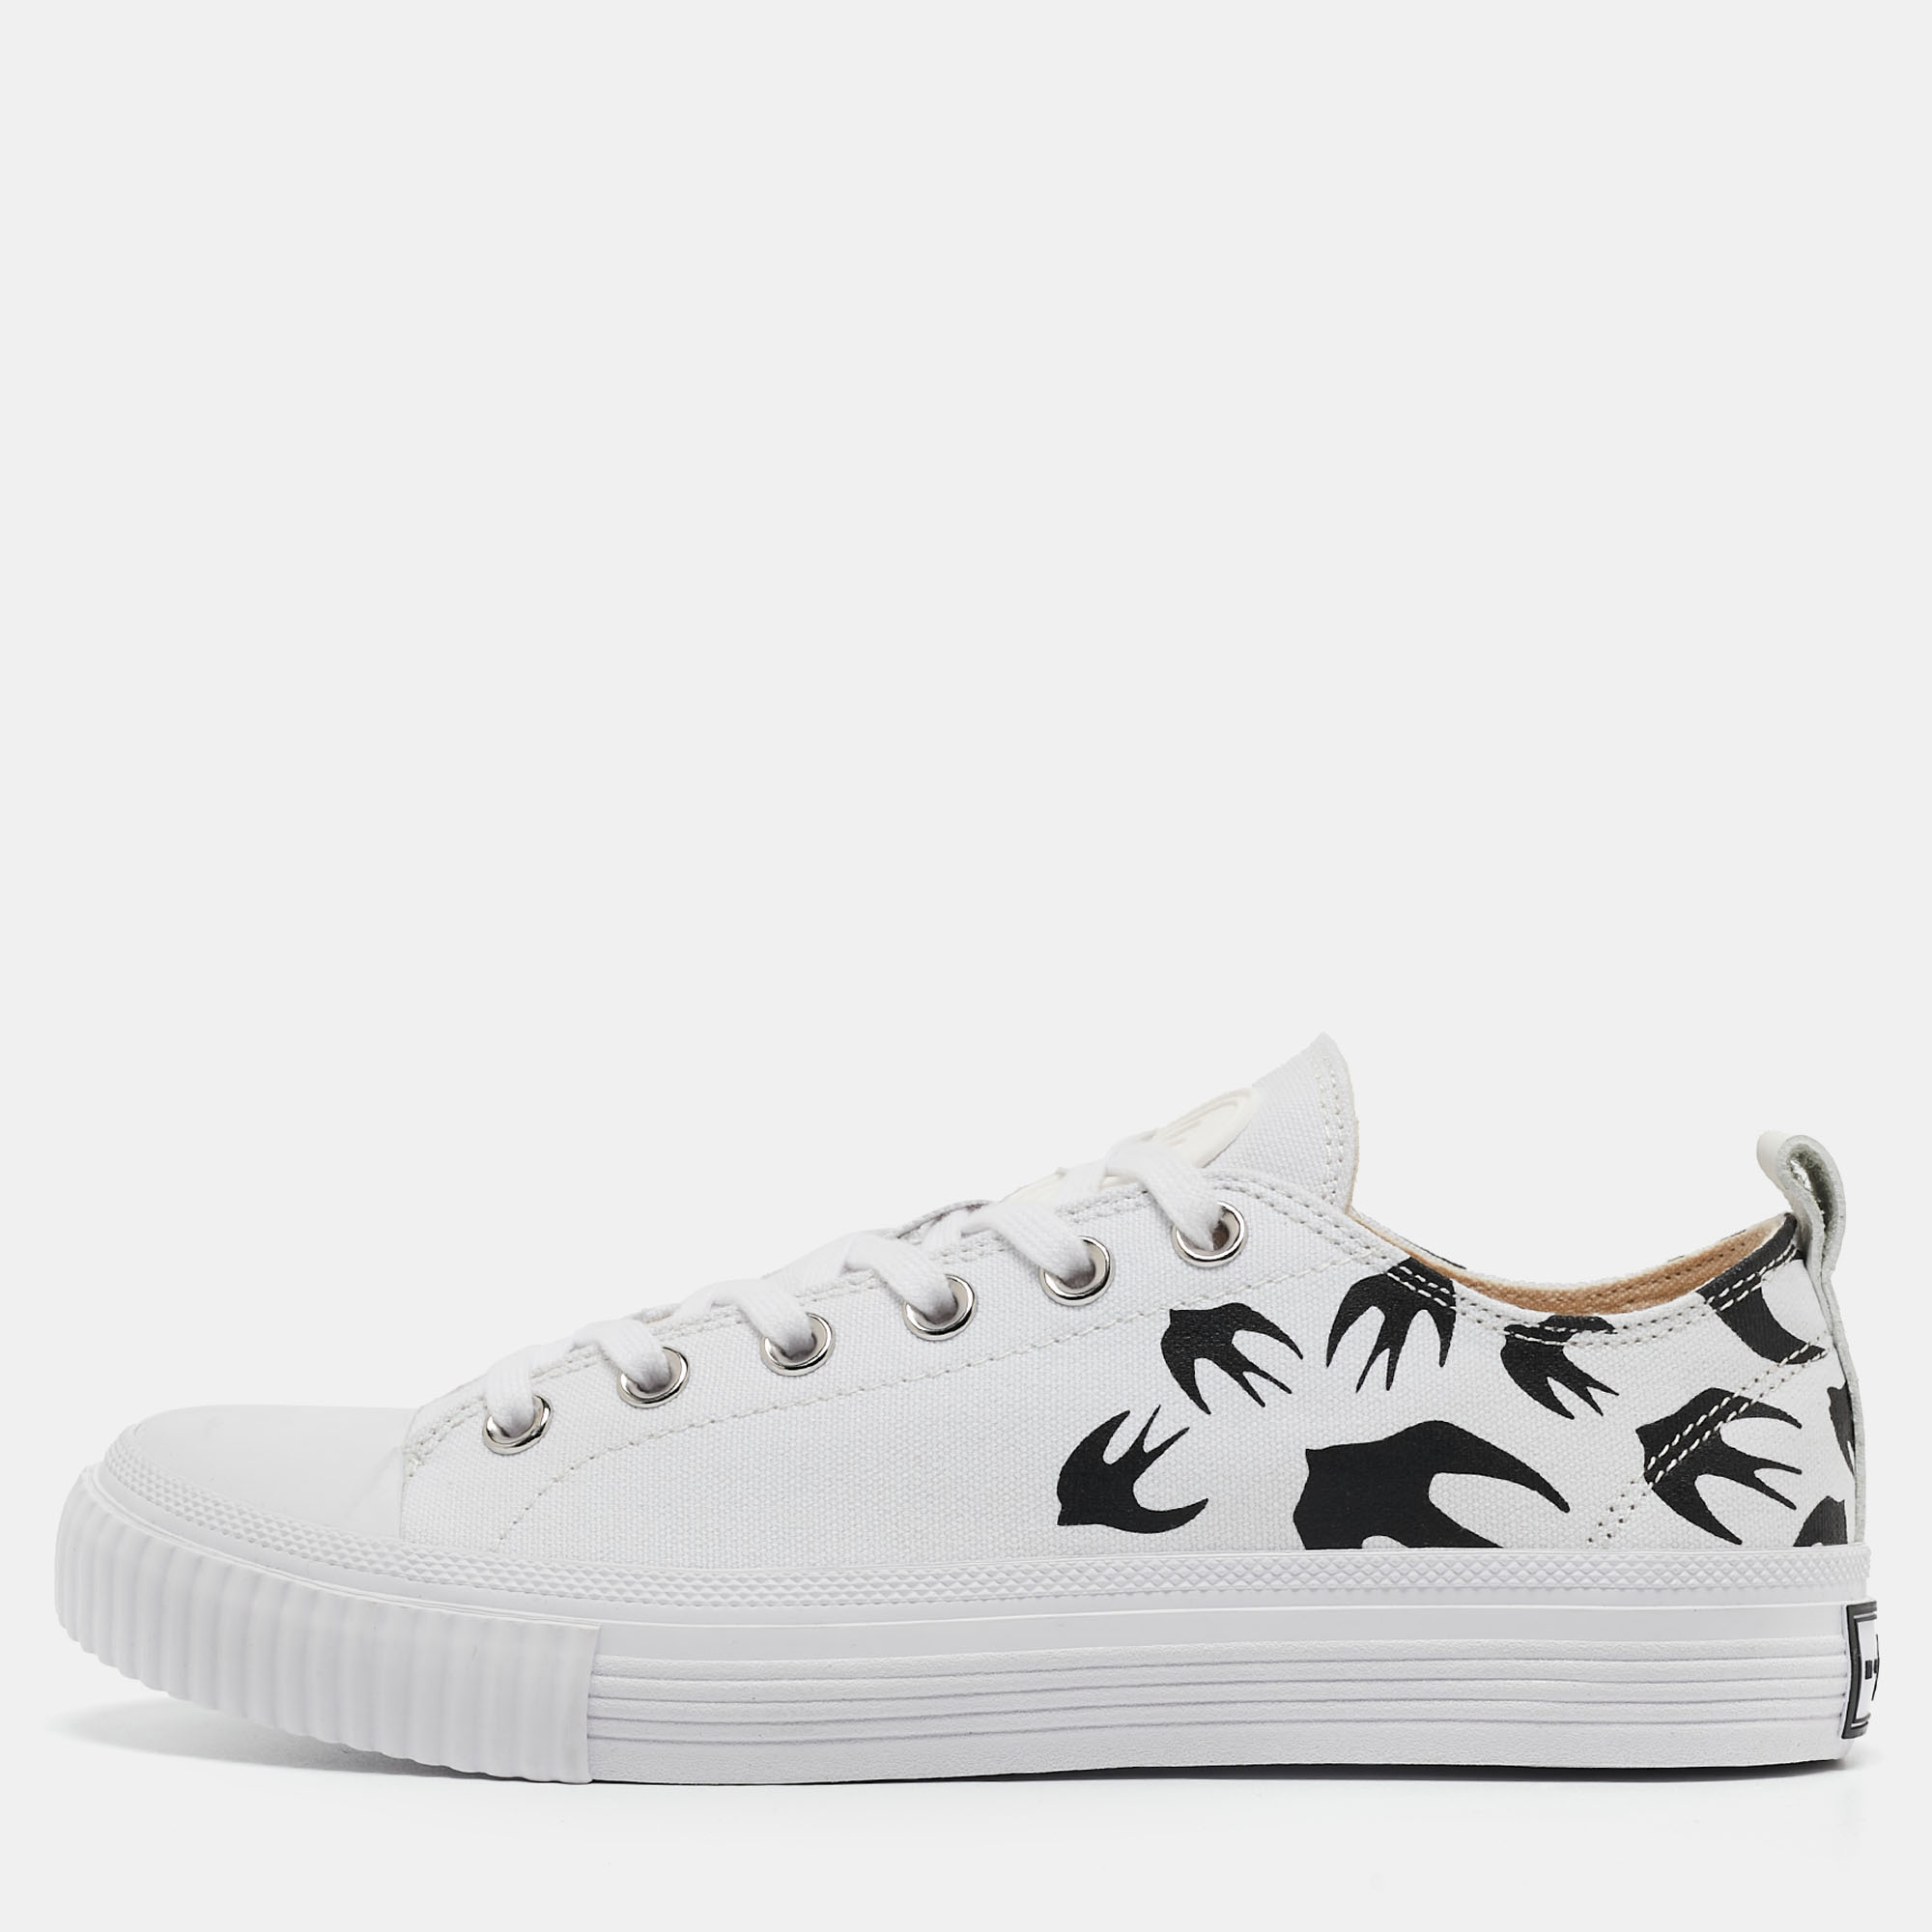 Pre-owned Mcq By Alexander Mcqueen White/black Canvas Shallow Swarm Sneakers Size 40